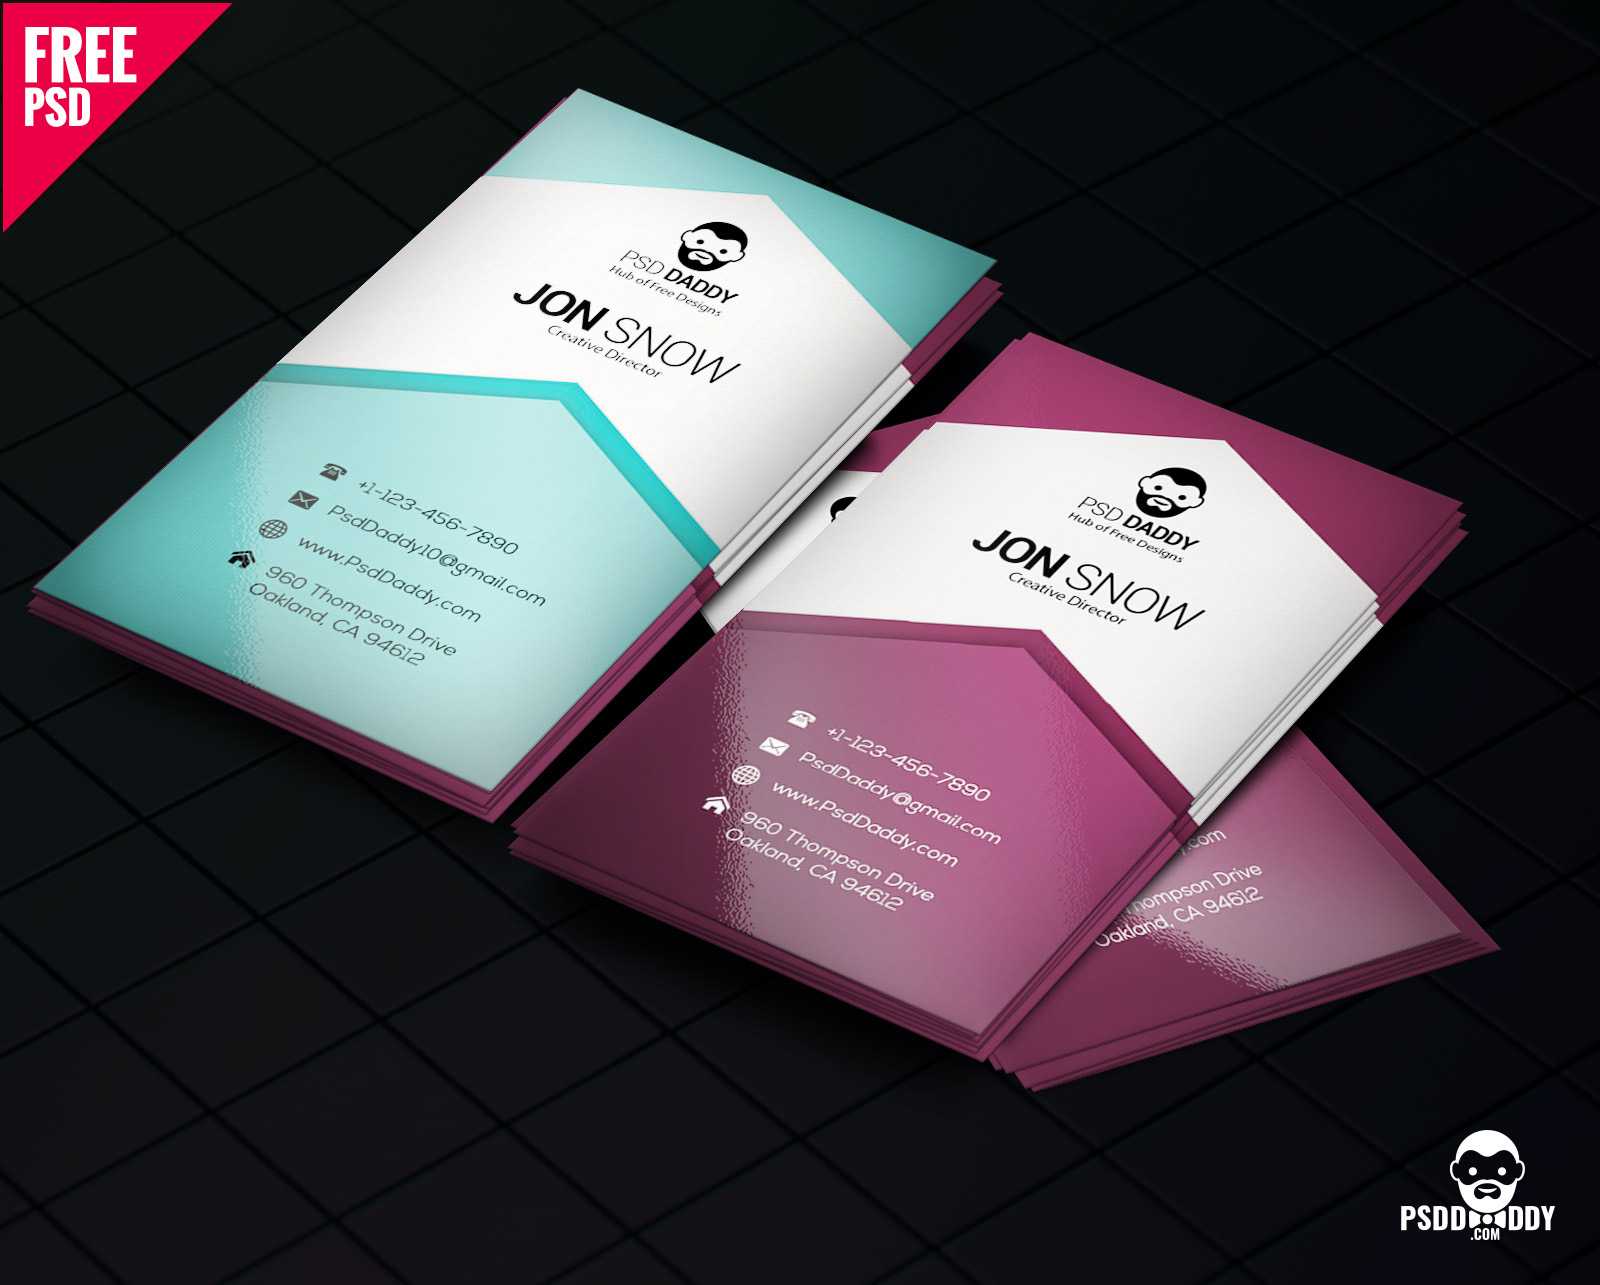 Download]Creative Business Card Psd Free | Psddaddy In Visiting Card Templates Psd Free Download